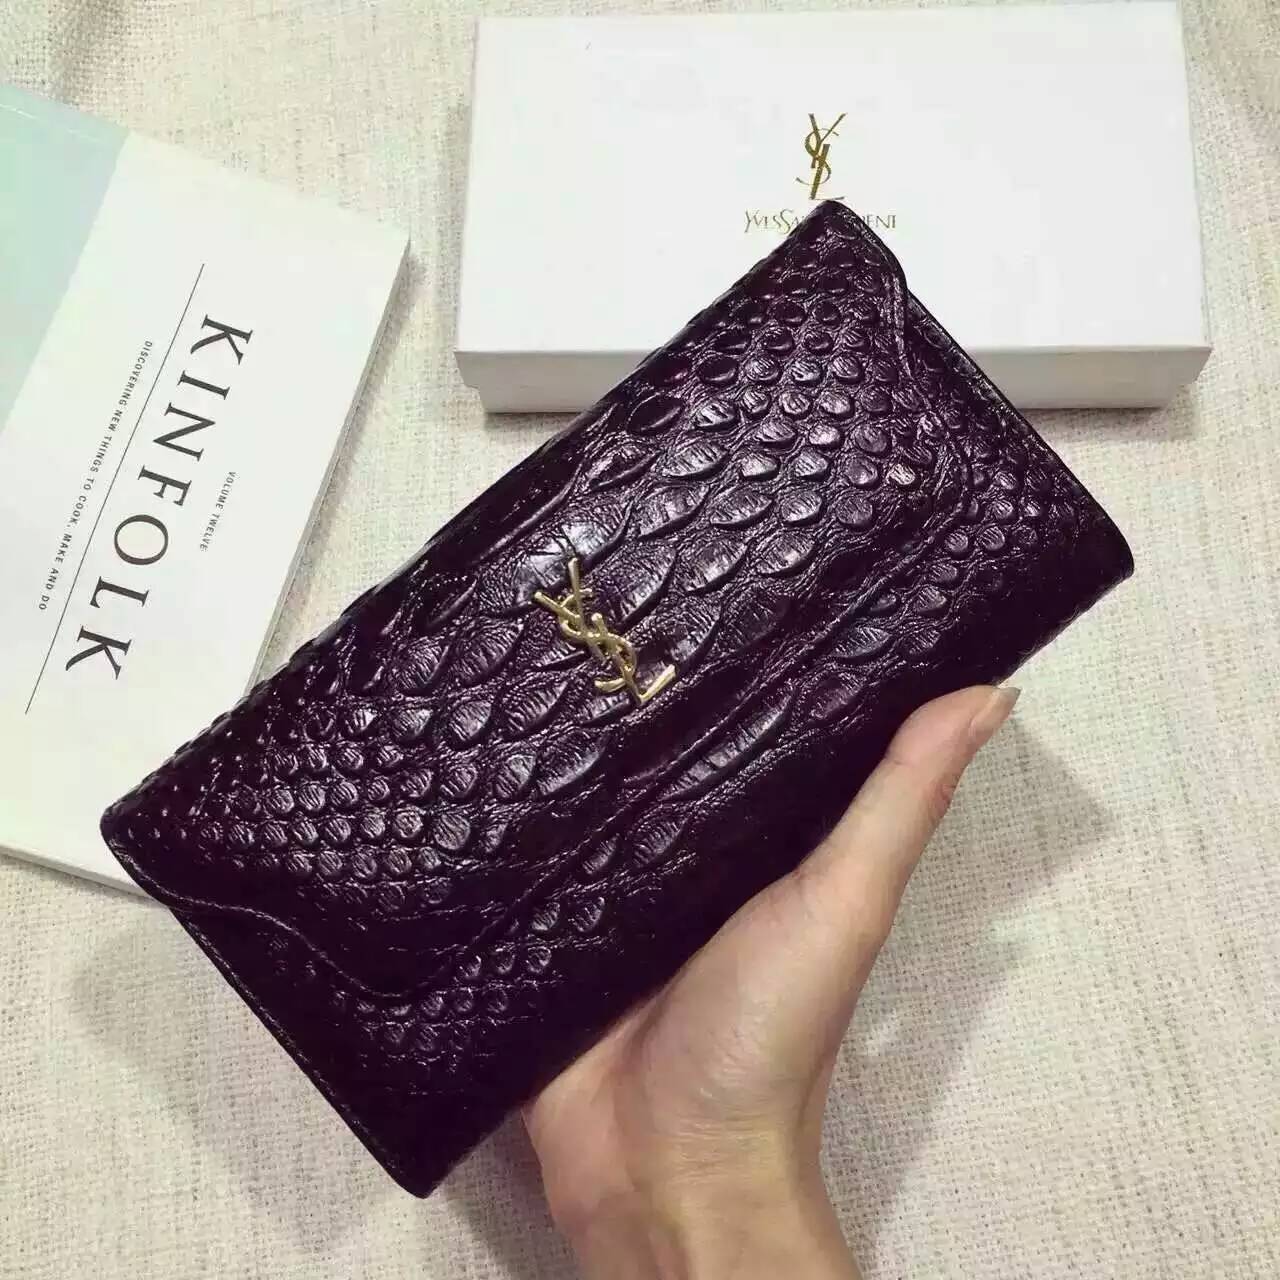 Limited Edition!2016 New Saint Laurent Small Leather Goods Cheap Sale-Saint Laurent Clutch in Black Python Embossed Leather - Click Image to Close